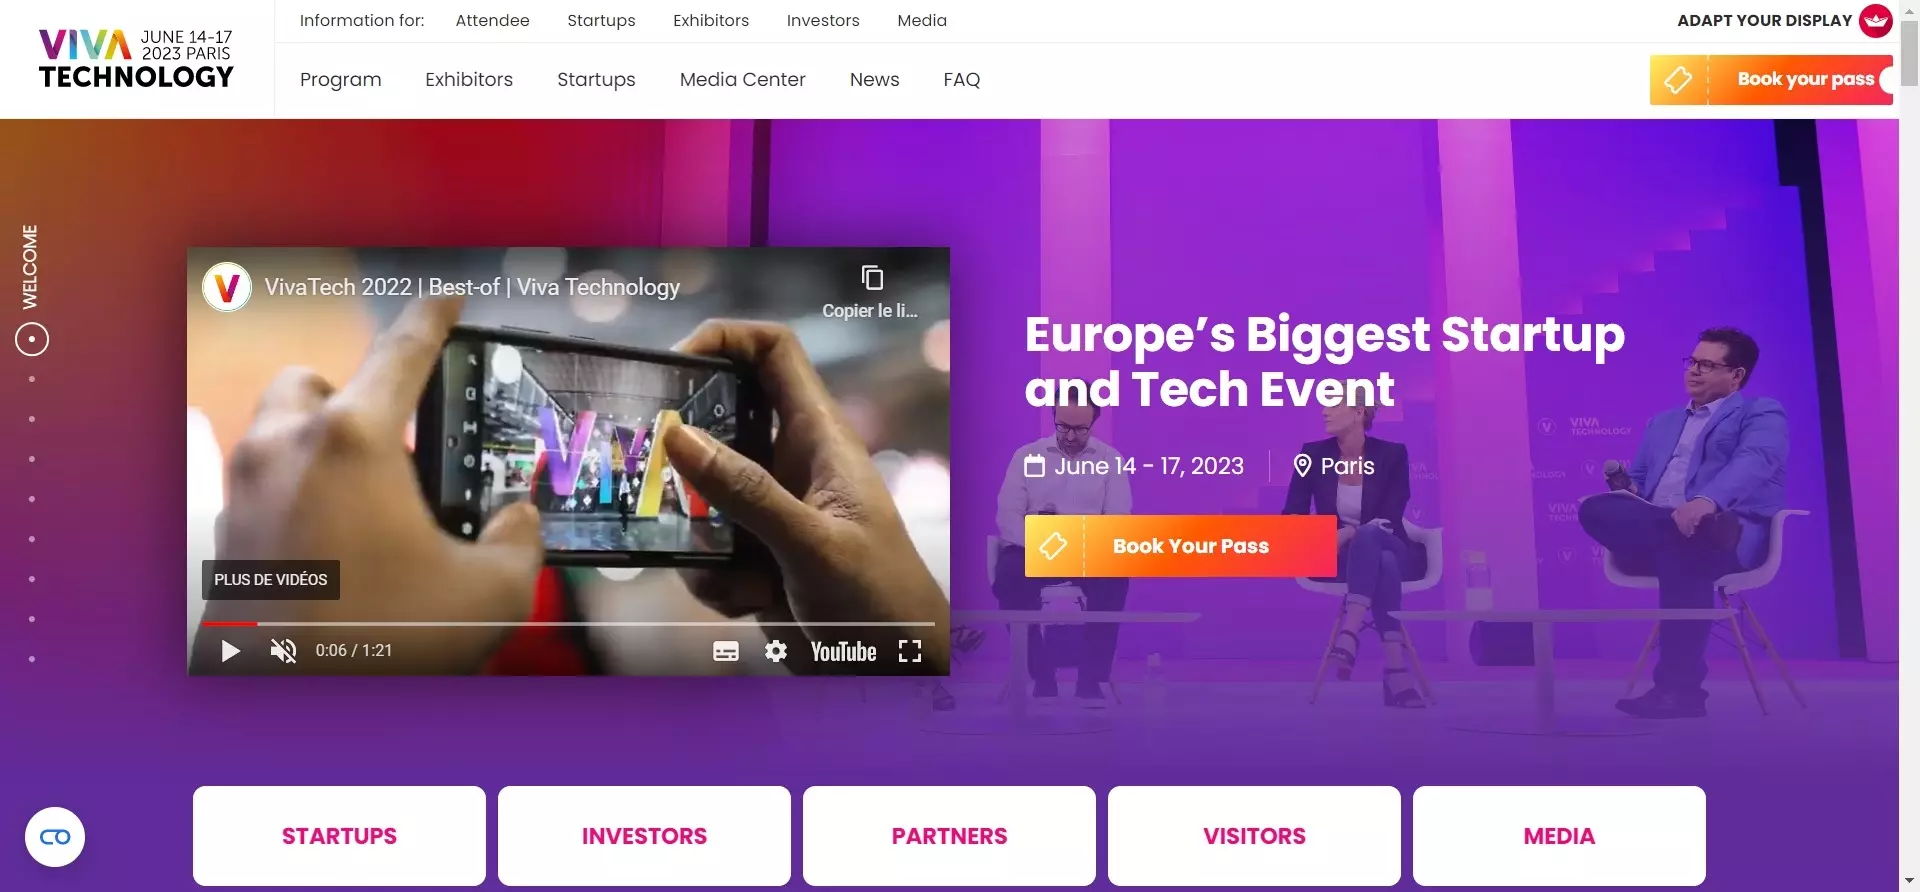 email marketing event vivatech